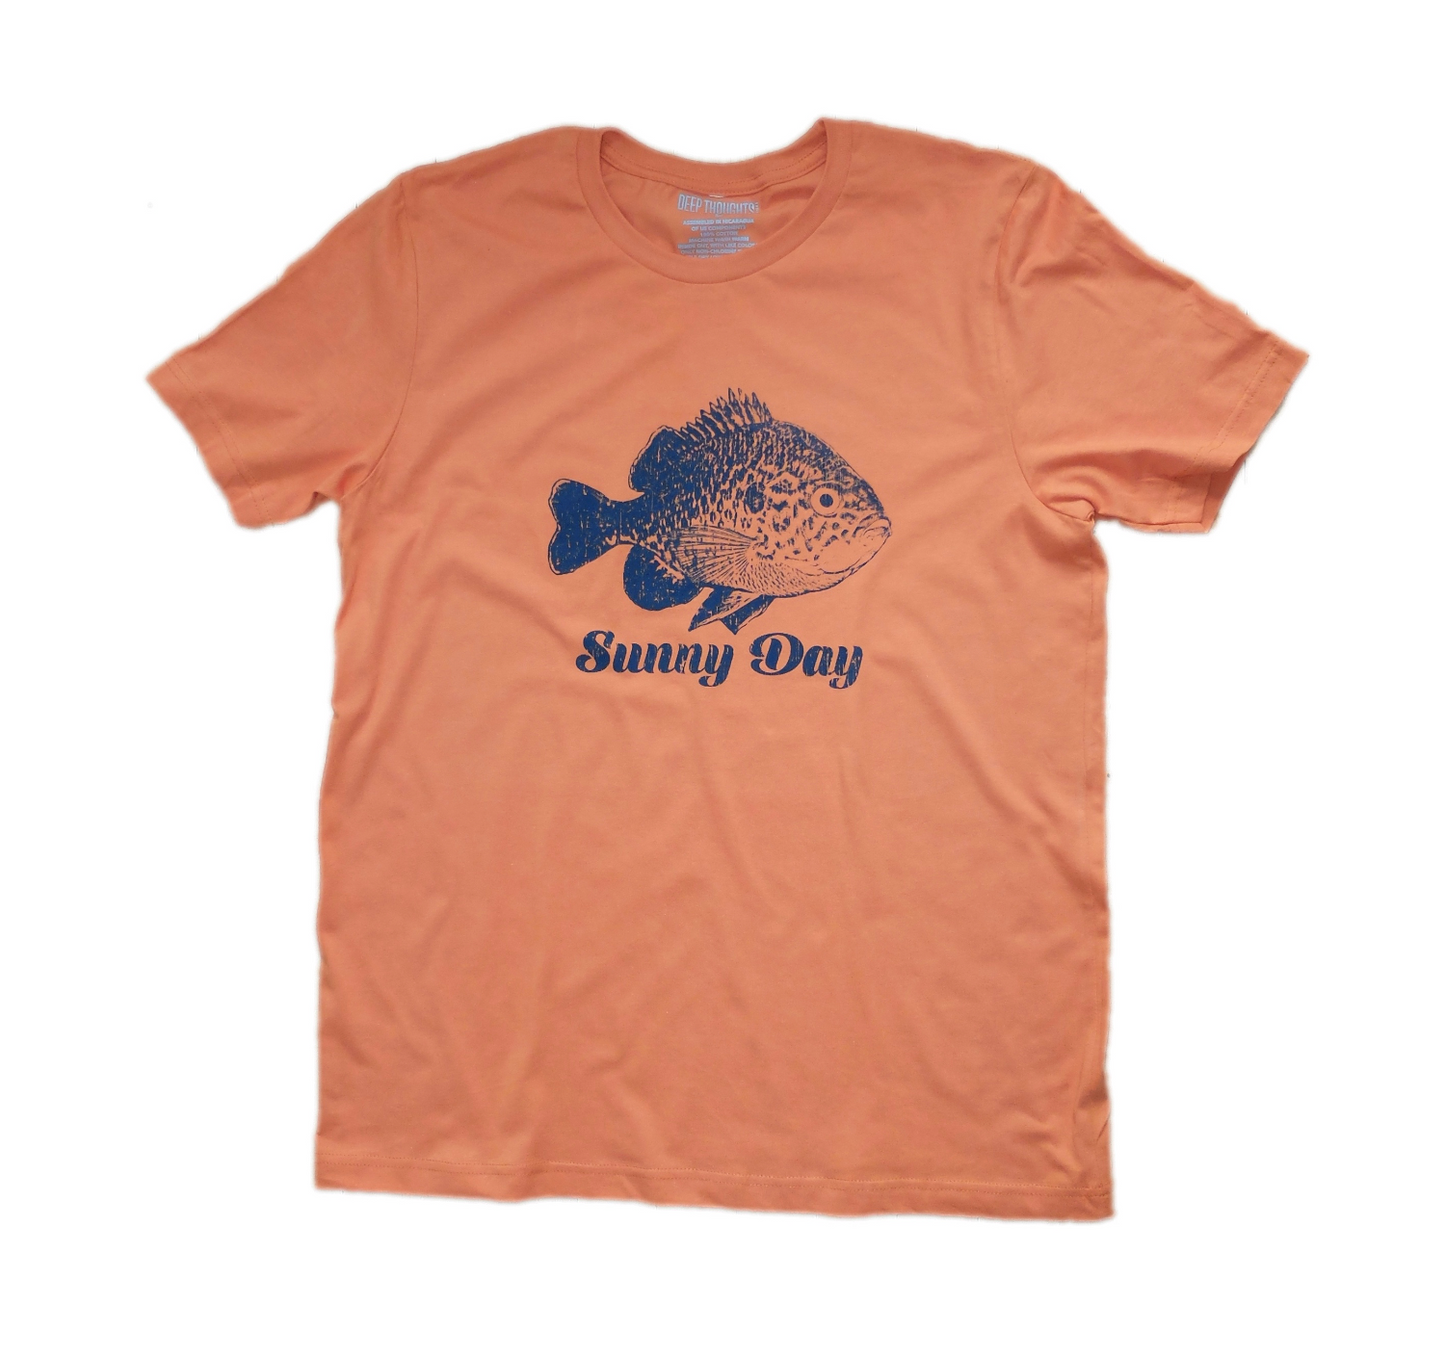 burnt orange cotton t-shirt with navy blue bluegill fish graphic and 'Sunny Day' text